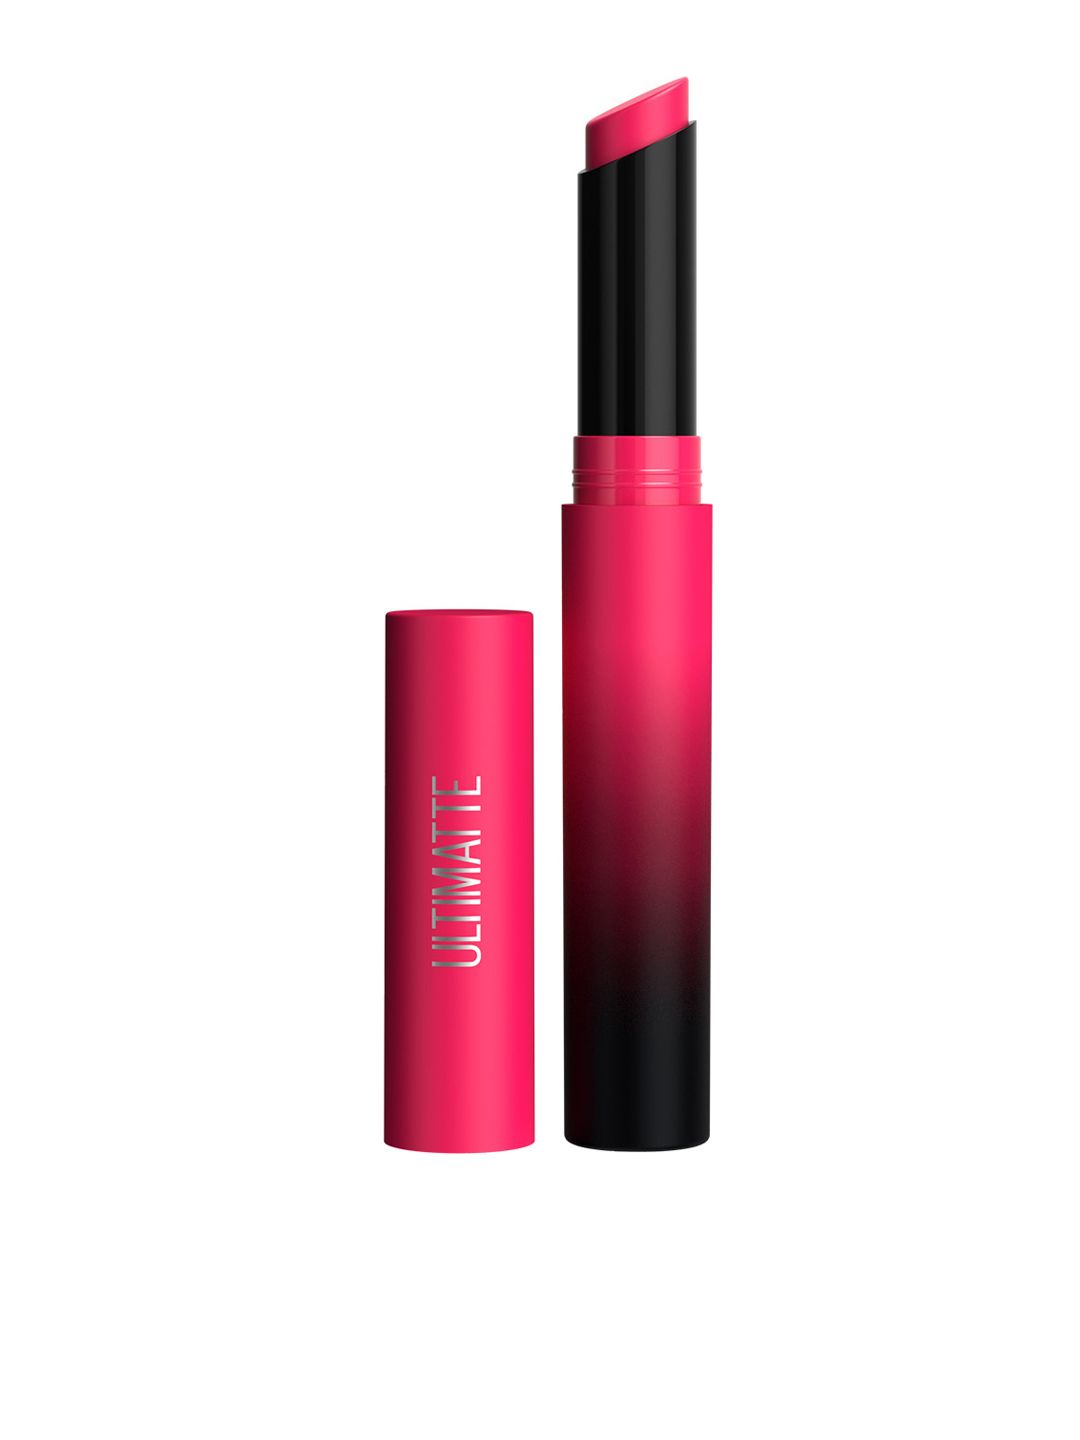 Maybelline New York Color Sensational Ultimattes Lipstick- 399 More Magenta- 1.7g Price in India